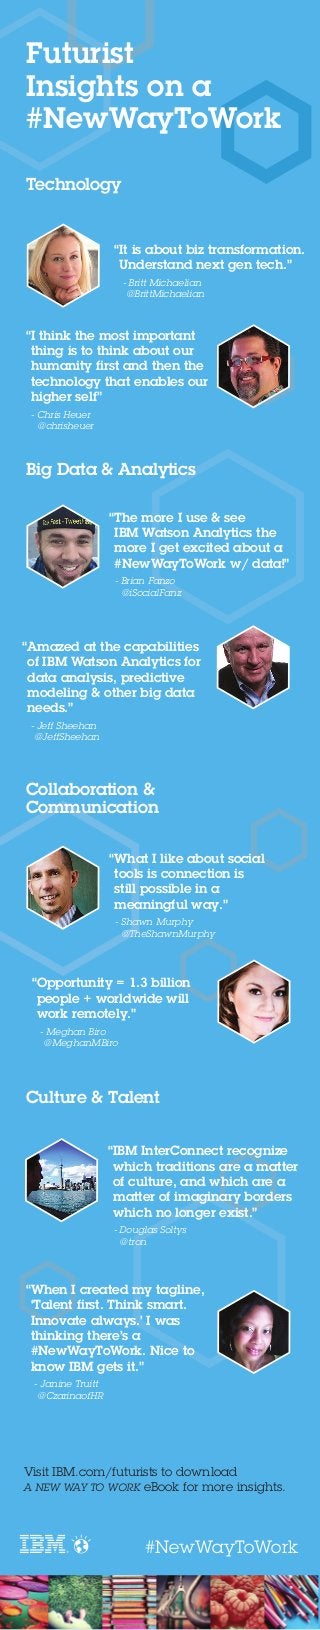 #NewWayToWork
Visit IBM.com/futurists to download
A NEW WAY TO WORK eBook for more insights.
“It is about biz transformation.
Understand next gen tech.”
- Britt Michaelian
@BrittMichaelian
Technology
“I think the most important
thing is to think about our
humanity first and then the
technology that enables our
higher self”
- Chris Heuer
@chrisheuer
Big Data & Analytics
“The more I use & see
IBM Watson Analytics the
more I get excited about a
#NewWayToWork w/ data!”
- Brian Fanzo
@iSocialFanz
Collaboration &
Communication
“Amazed at the capabilities
of IBM Watson Analytics for
data analysis, predictive
modeling & other big data
needs.”
- Jeff Sheehan
@JeffSheehan
“What I like about social
tools is connection is
still possible in a
meaningful way.”
- Shawn Murphy
@TheShawnMurphy
“Opportunity = 1.3 billion
people + worldwide will
work remotely.”
- Meghan Biro
@MeghanMBiro
Culture & Talent
“IBM InterConnect recognize
which traditions are a matter
of culture, and which are a
matter of imaginary borders
which no longer exist.”
- Douglas Soltys
@tron
“When I created my tagline,
‘Talent first. Think smart.
Innovate always.’ I was
thinking there’s a
#NewWayToWork. Nice to
know IBM gets it.”
- Janine Truitt
@CzarinaofHR
Futurist
Insights on a
#NewWayToWork
 